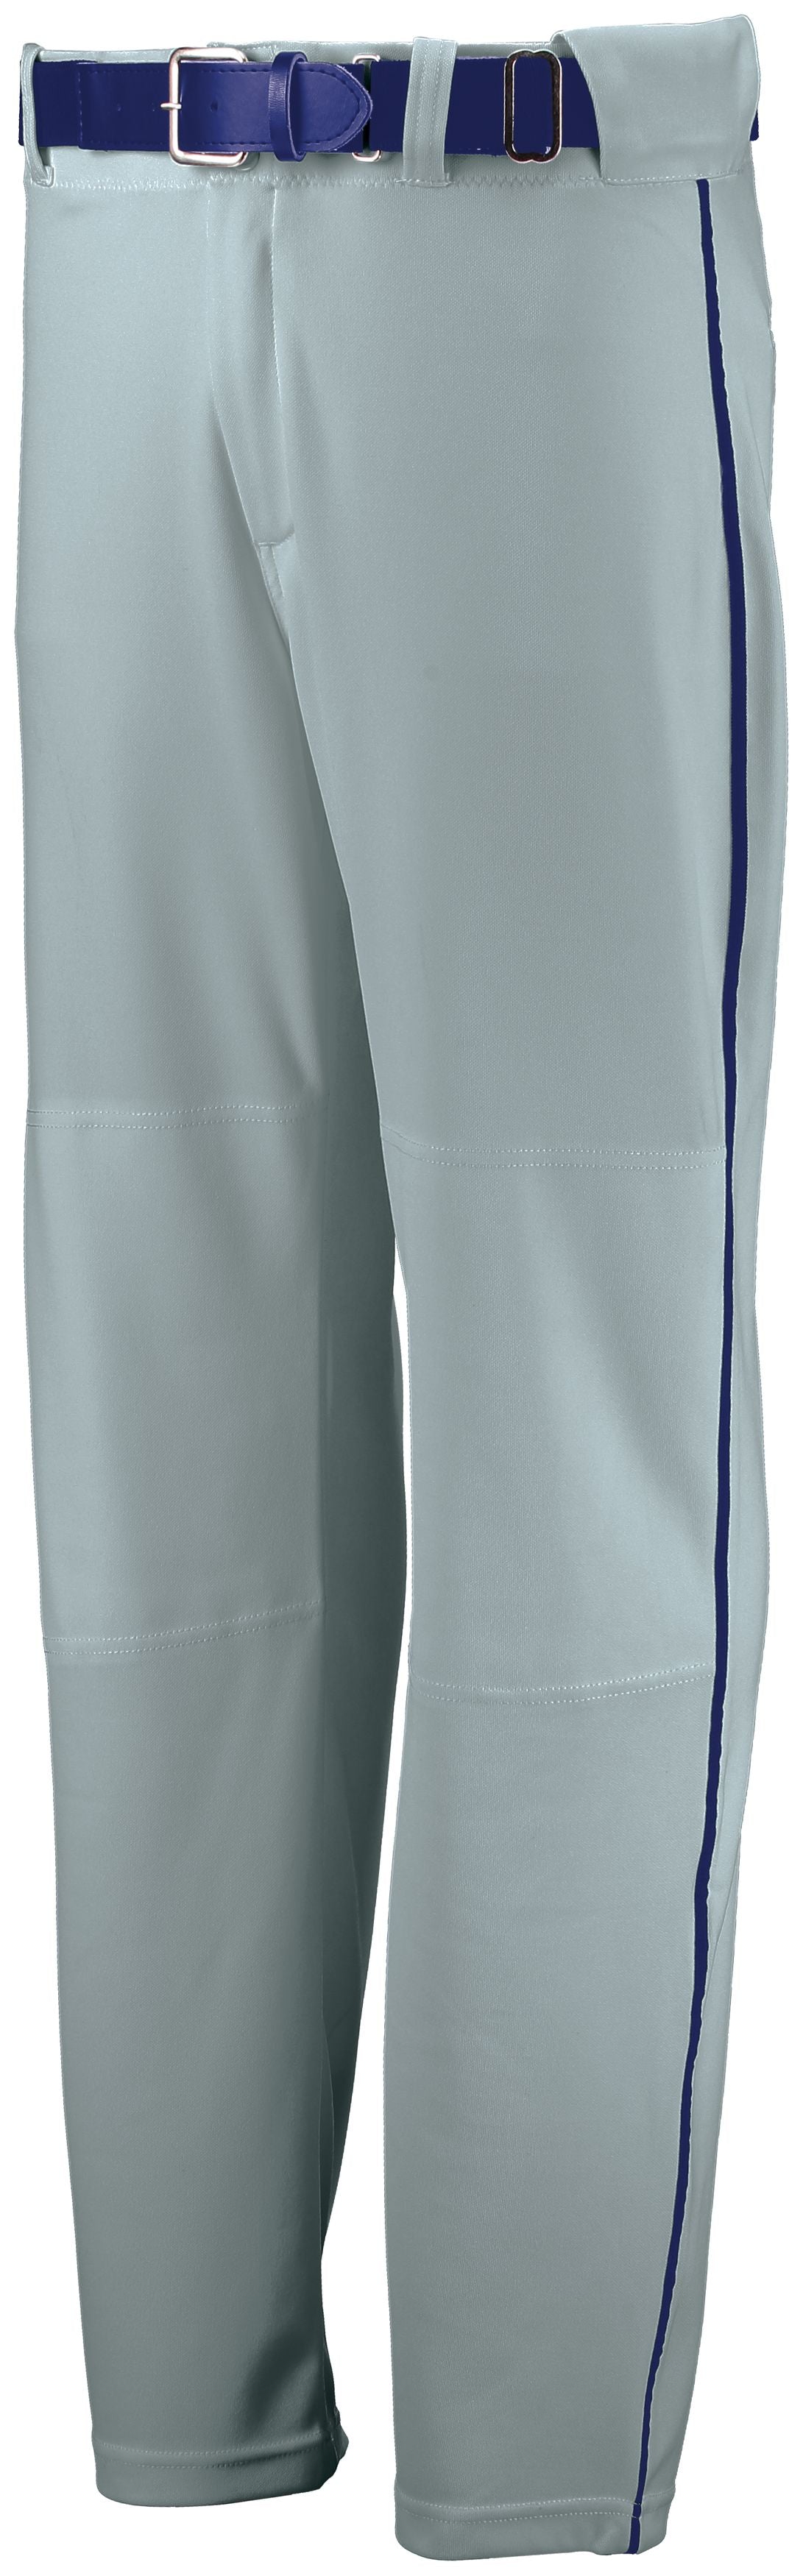 Russell Athletic Open Bottom Piped Pant in Baseball Grey/Royal  -Part of the Adult, Adult-Pants, Pants, Baseball, Russell-Athletic-Products, All-Sports, All-Sports-1 product lines at KanaleyCreations.com